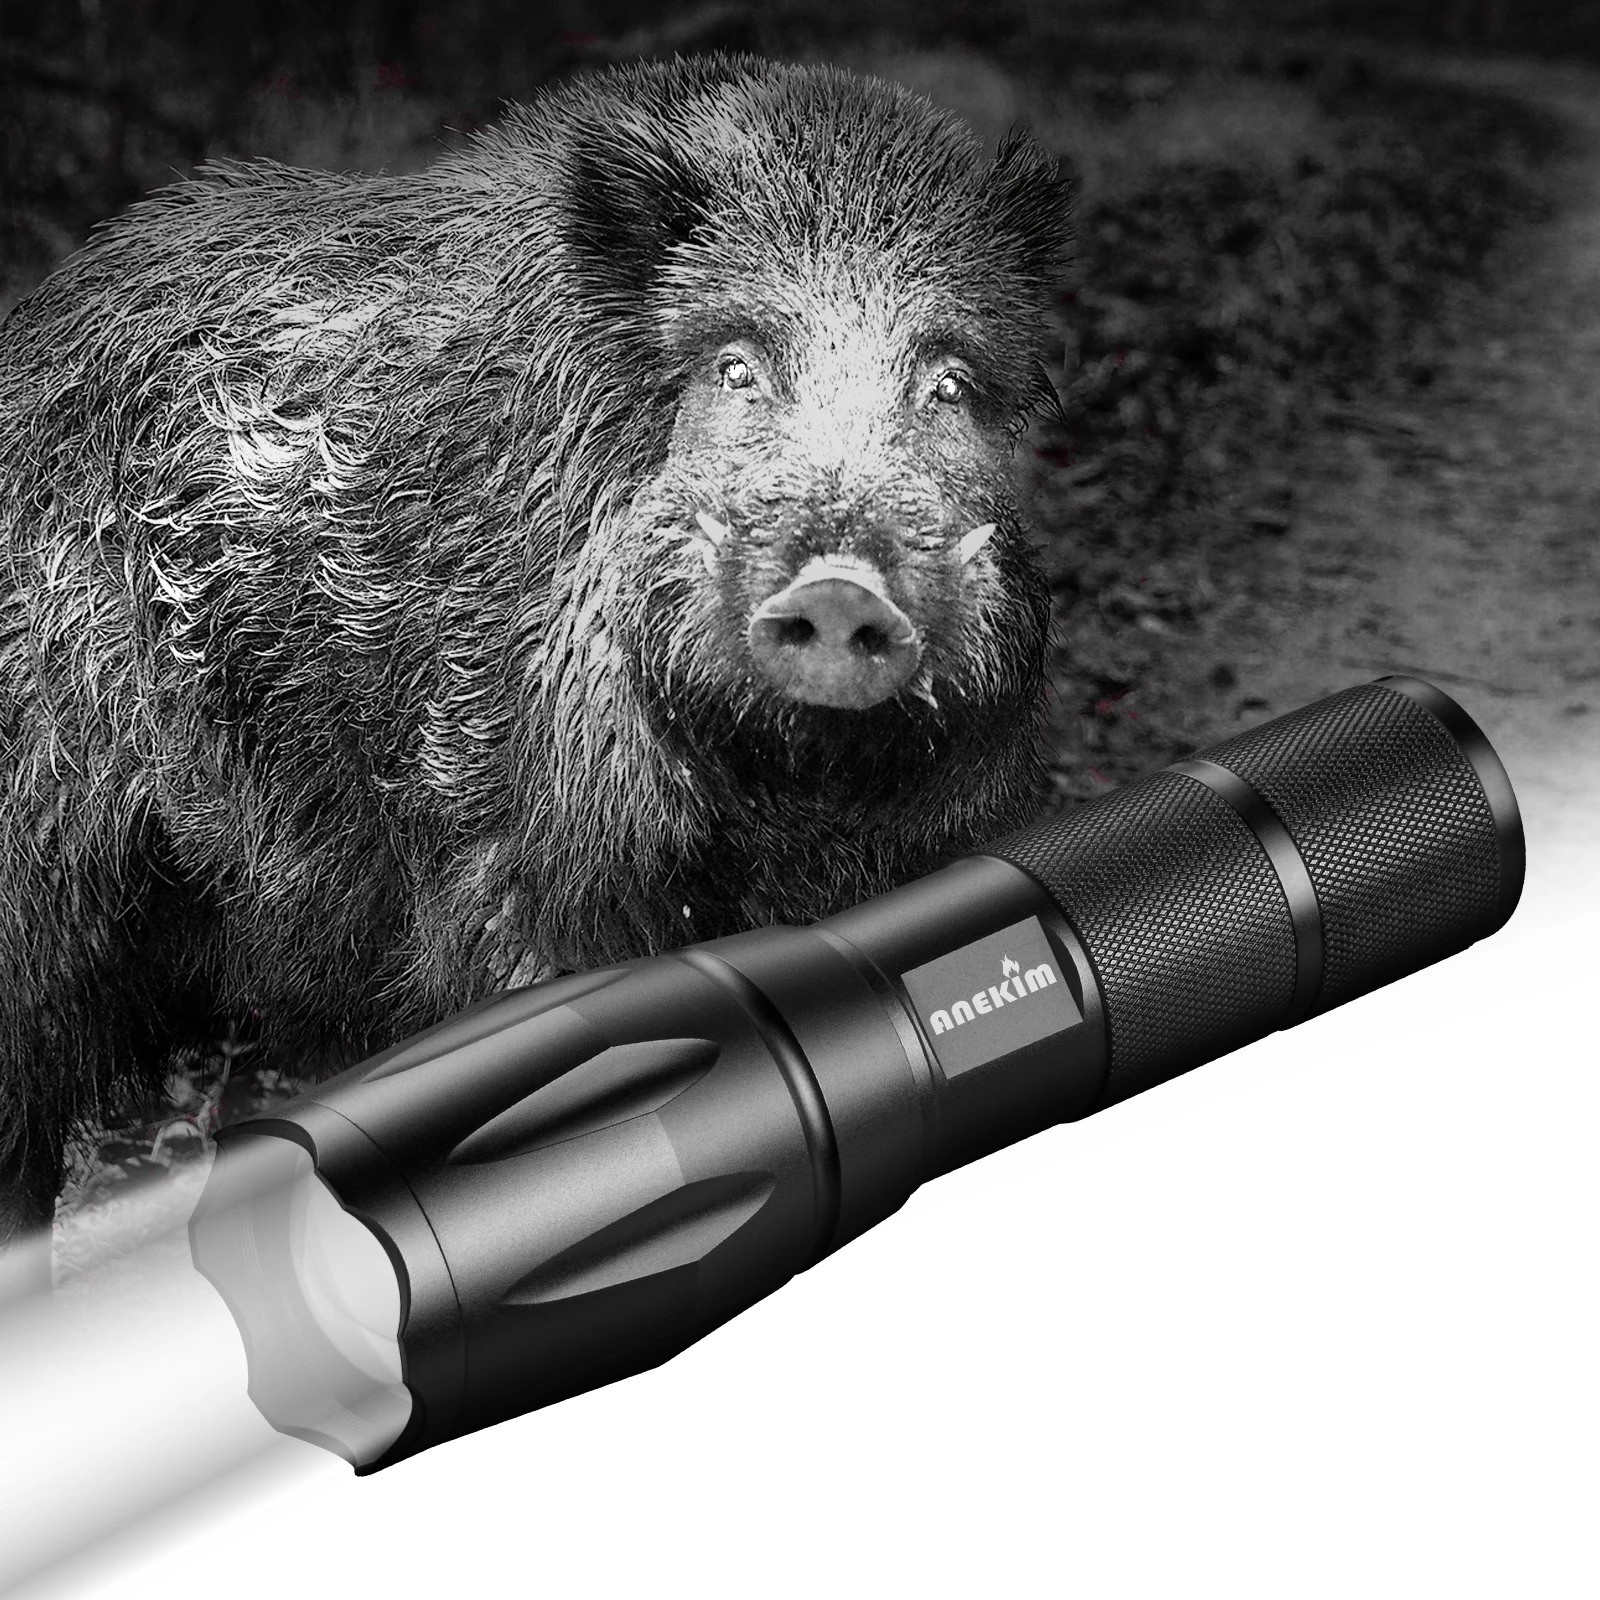 ANEKIM UC10 850/940nm Infrared Flashlight, Single Mode Zoomable Tactical Flashlight, Night Vision Device Hunting Observation